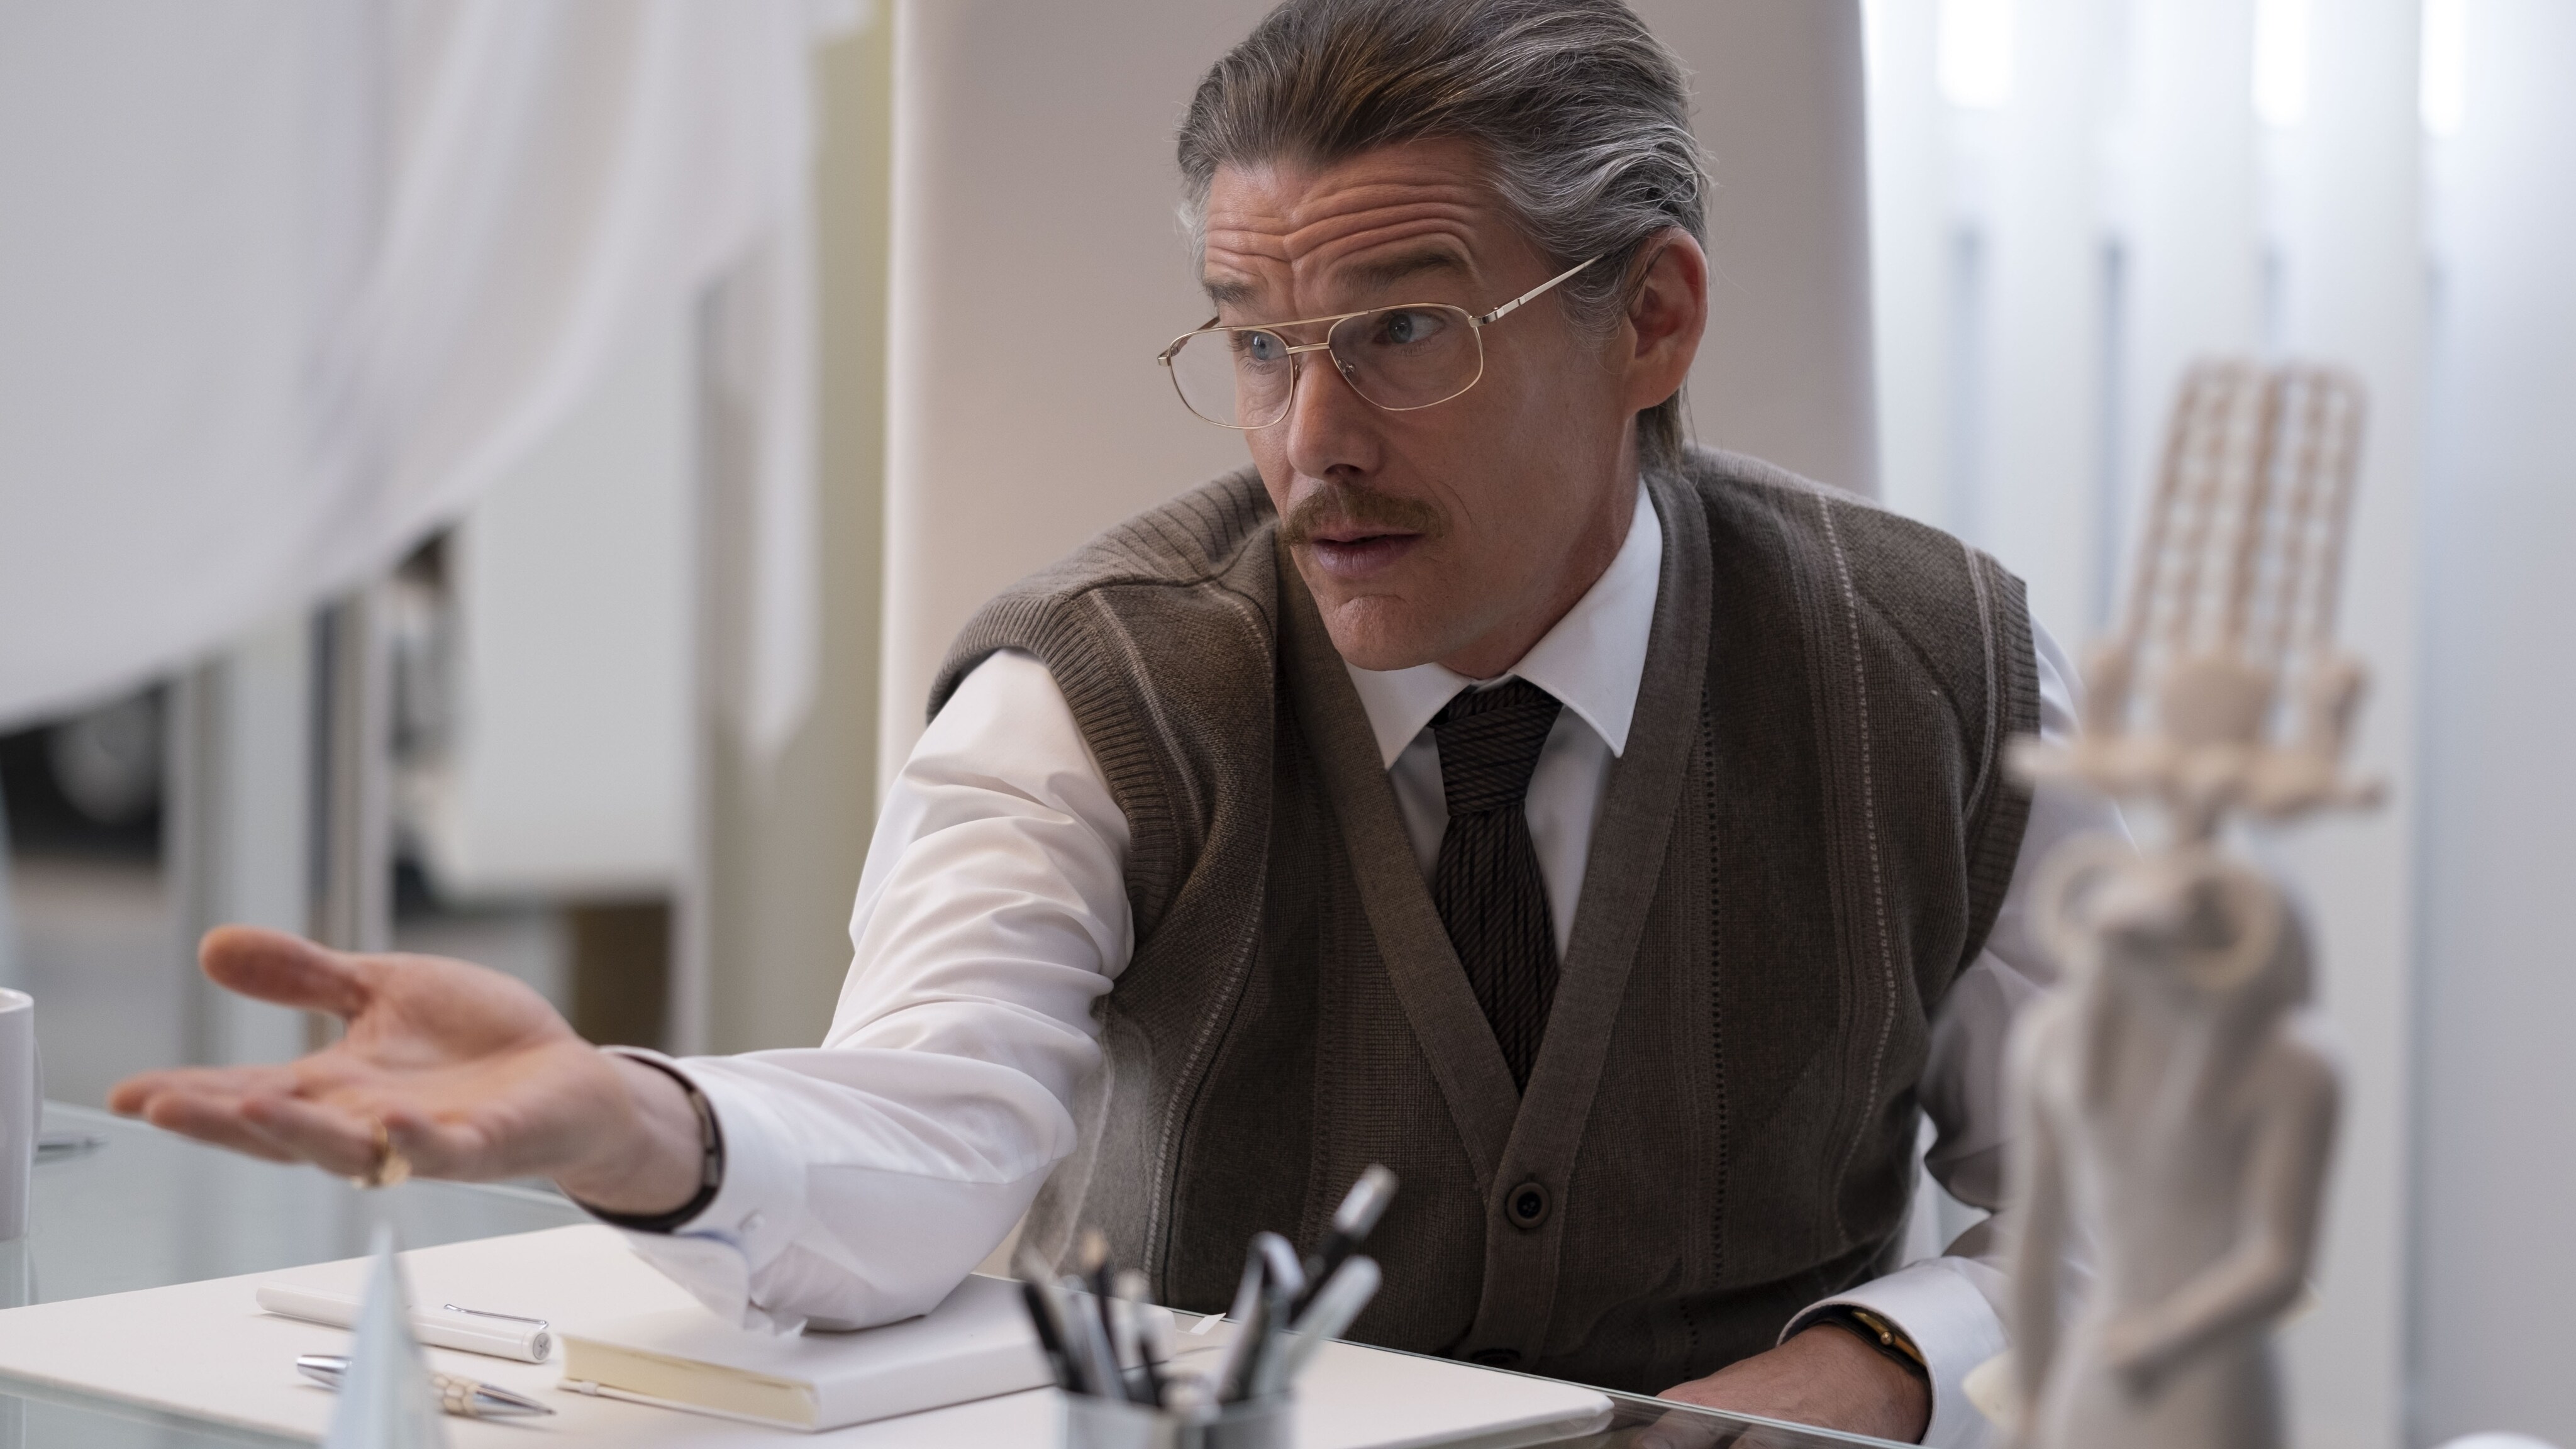 Ethan Hawke as Arthur Harrow in Marvel Studios' MOON KNIGHT, exclusively on Disney+. Photo by Gabor Kotschy. ©Marvel Studios 2022. All Rights Reserved.